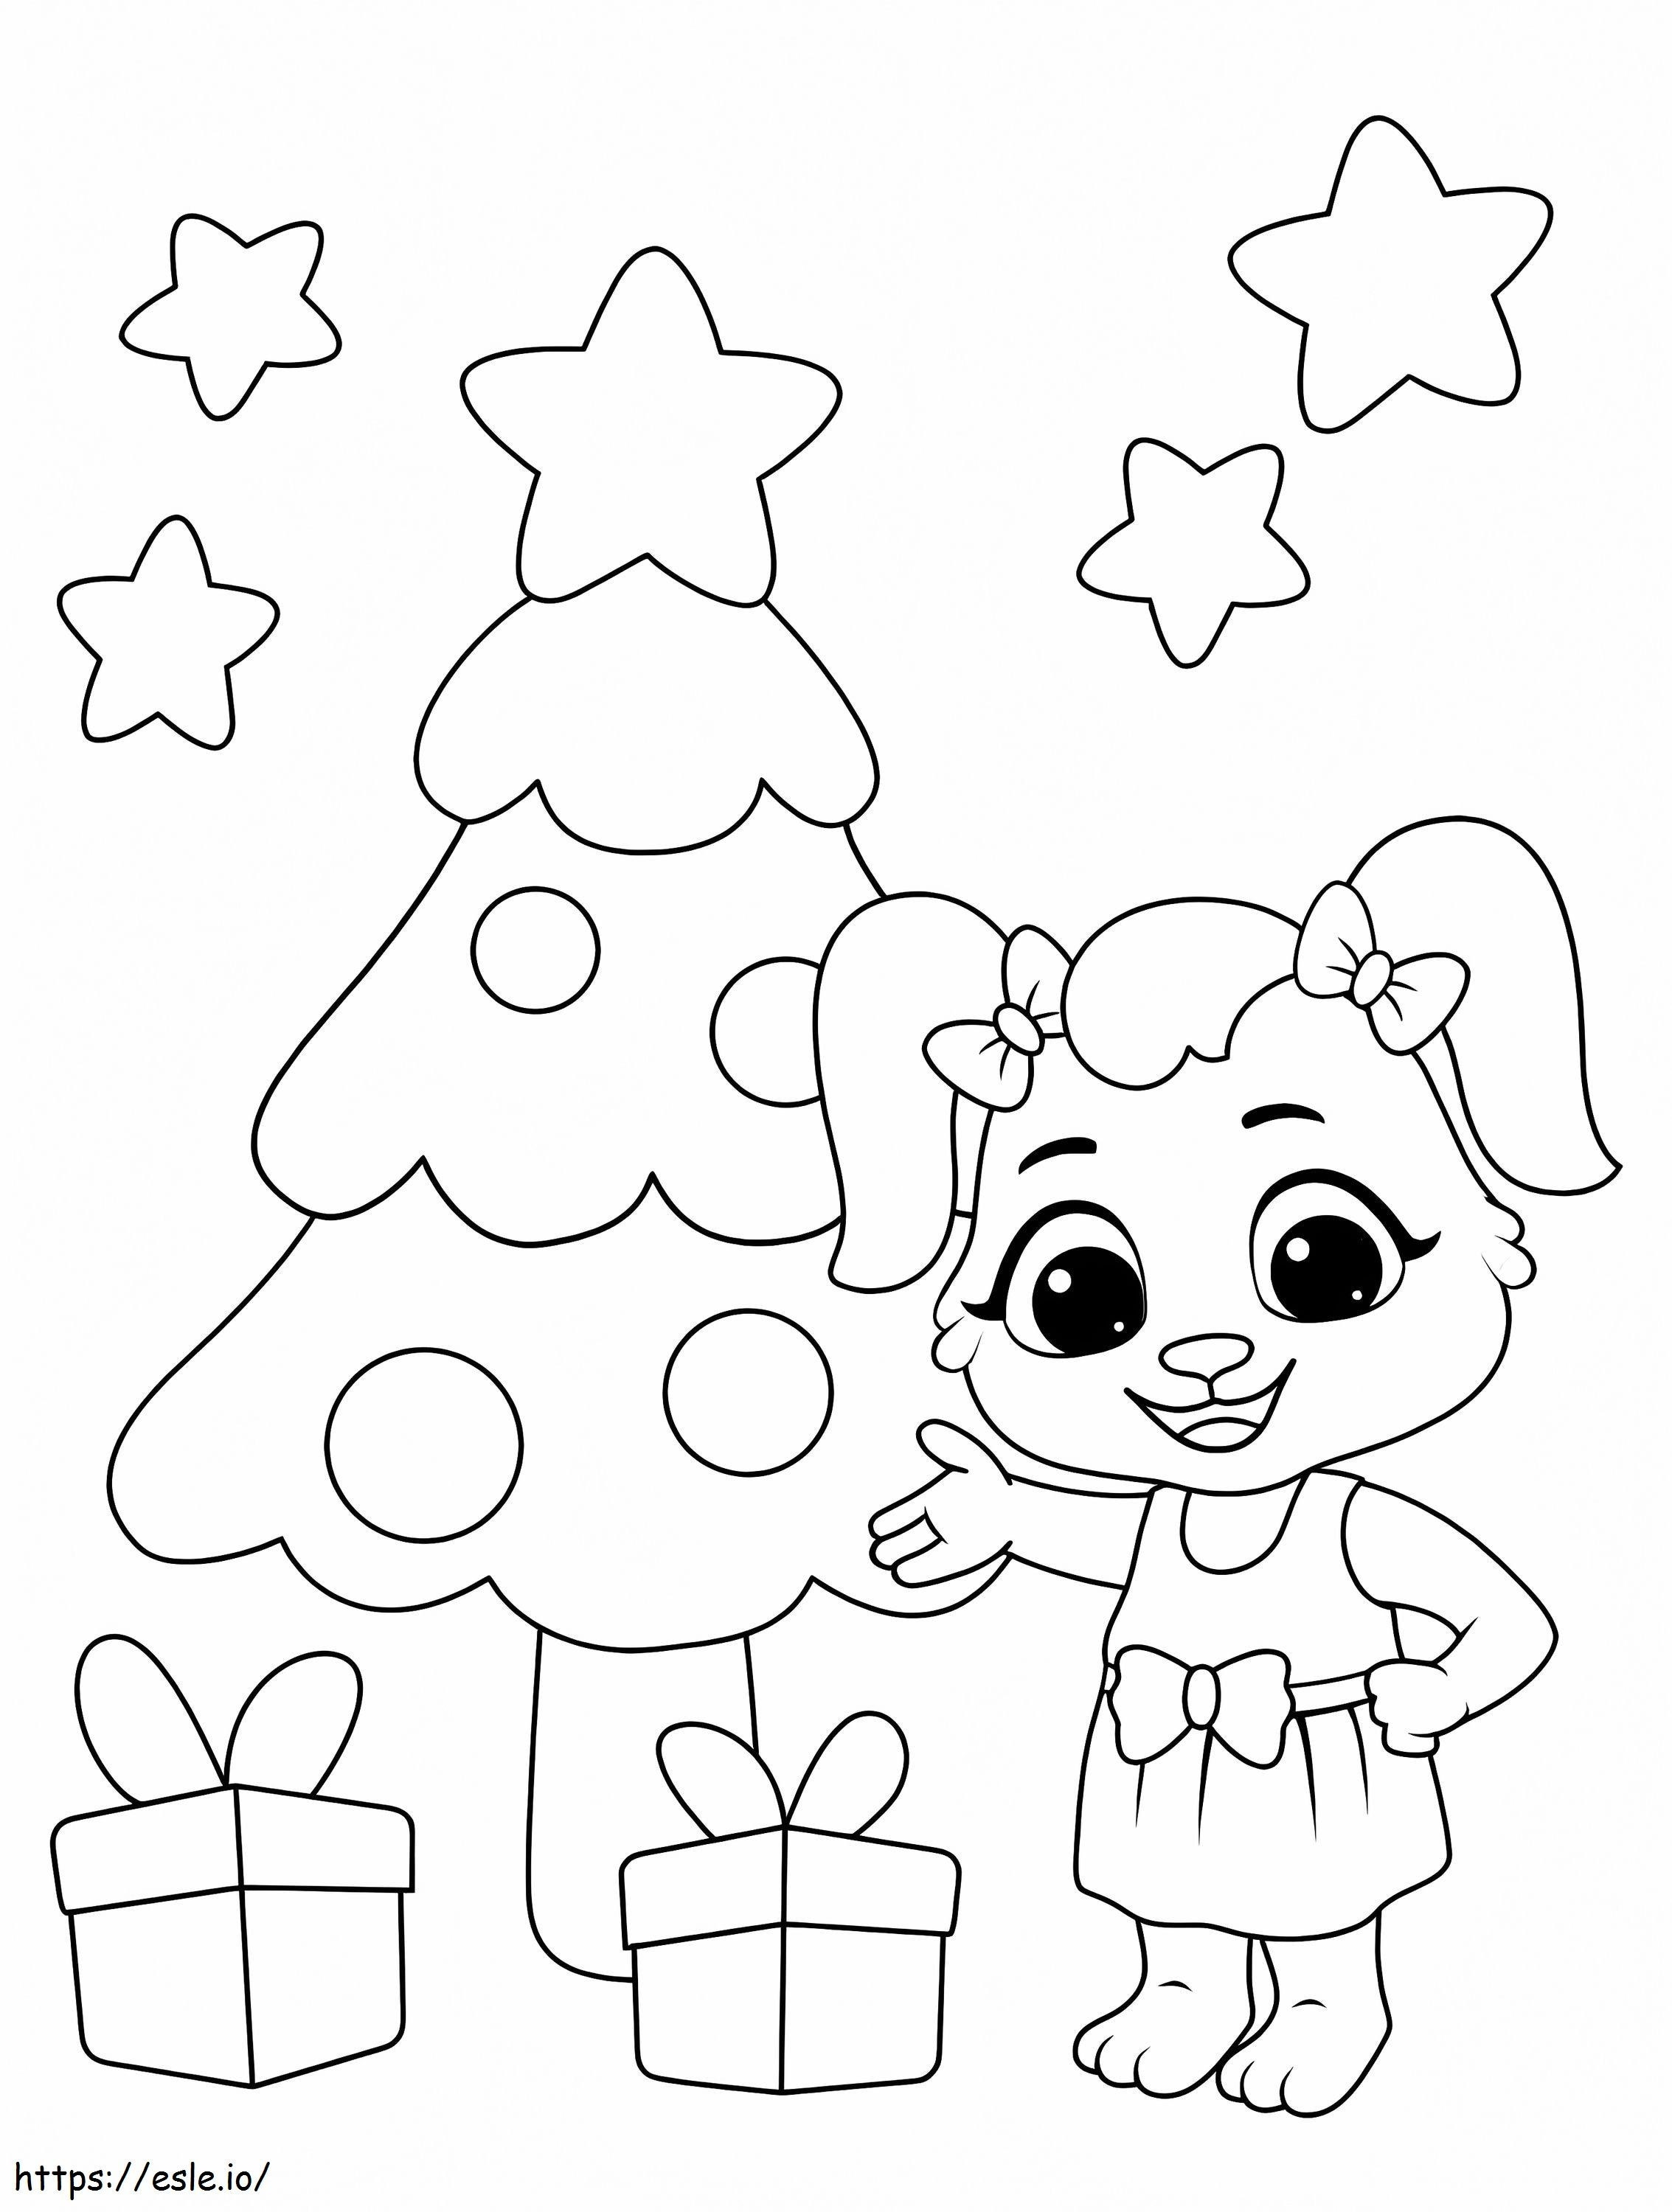 Christmas Tree With Gift Boxes And Stars coloring page